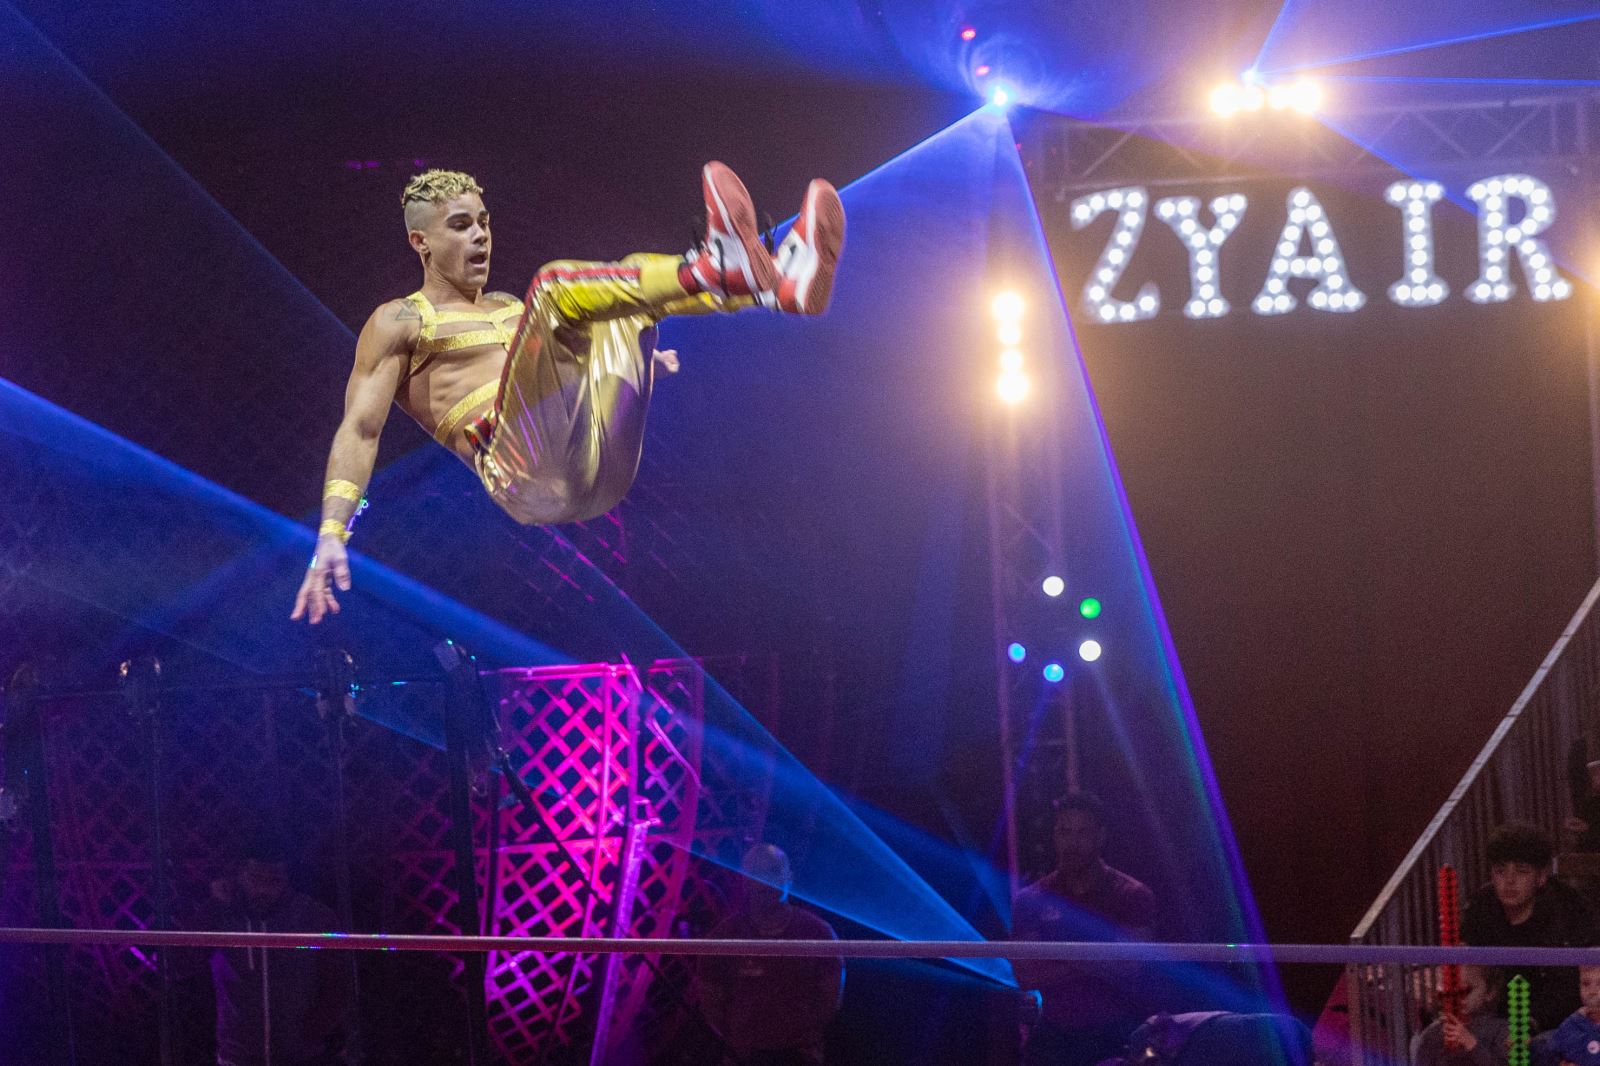 Circus performer flies through the air before landing on the trapeze wire